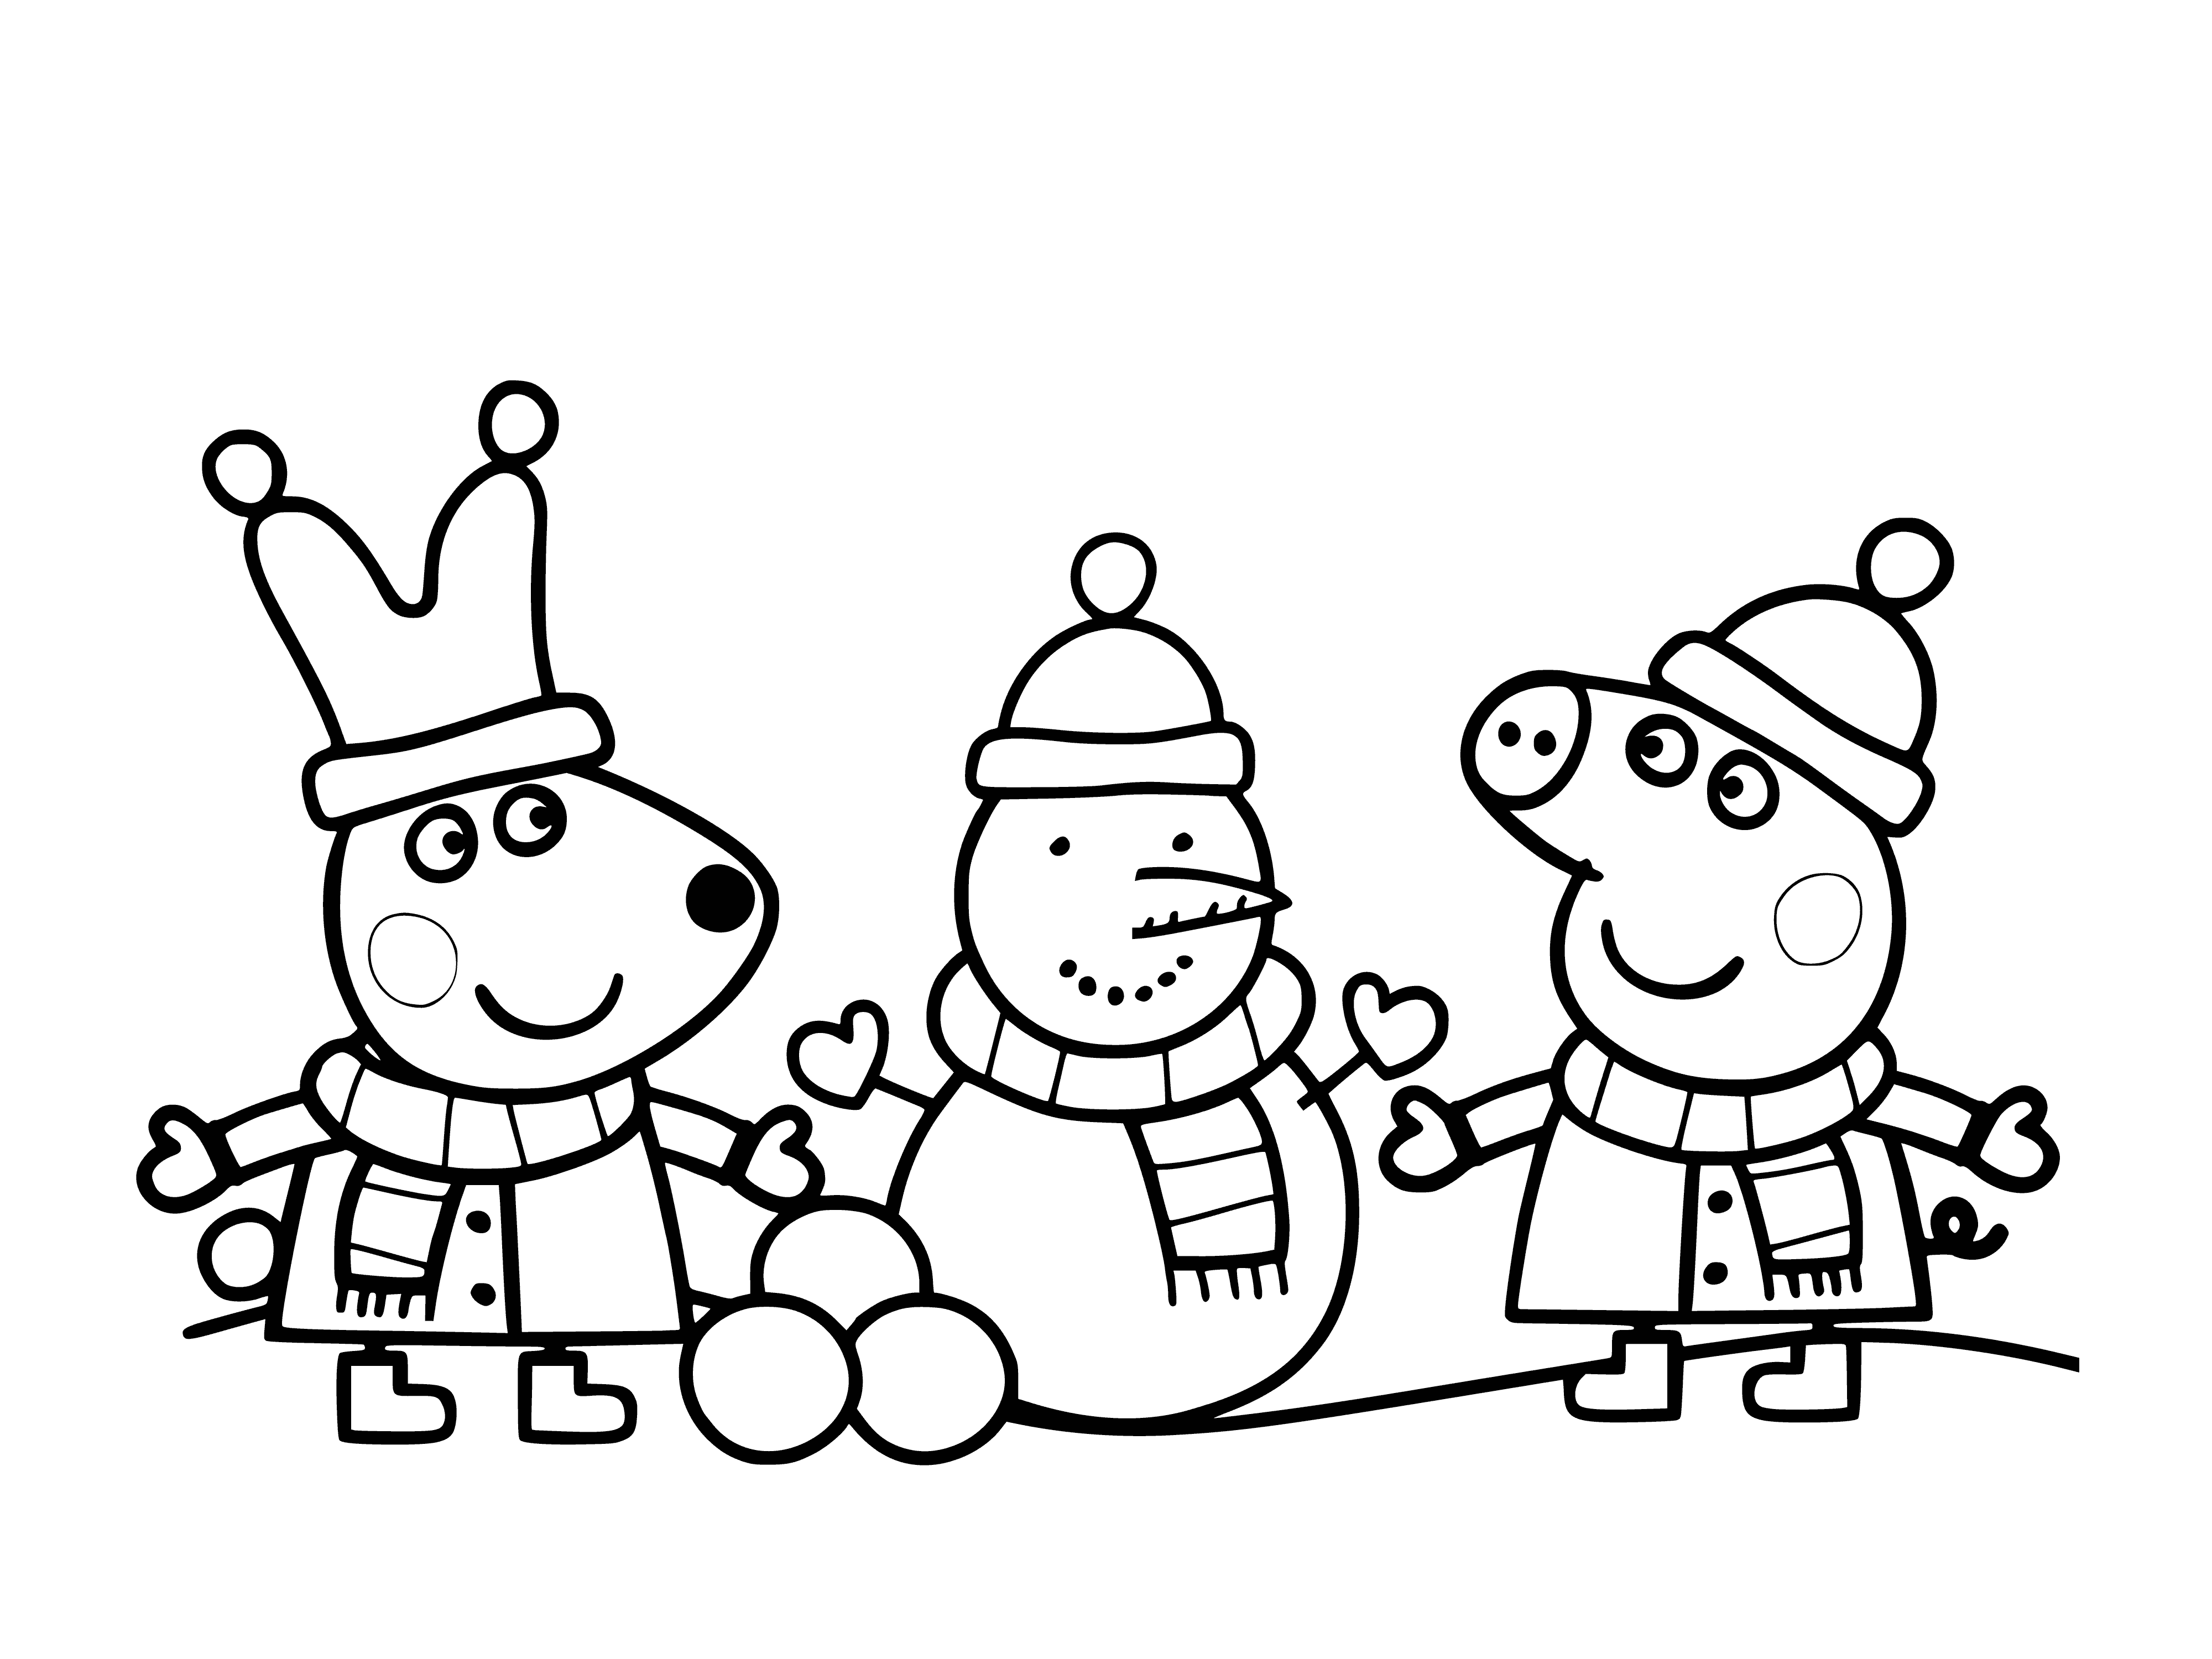 coloring page: Peppa and Rebecca making a snowman. Peppa has a snowball, Rebecca has a snowball - both admiring it.